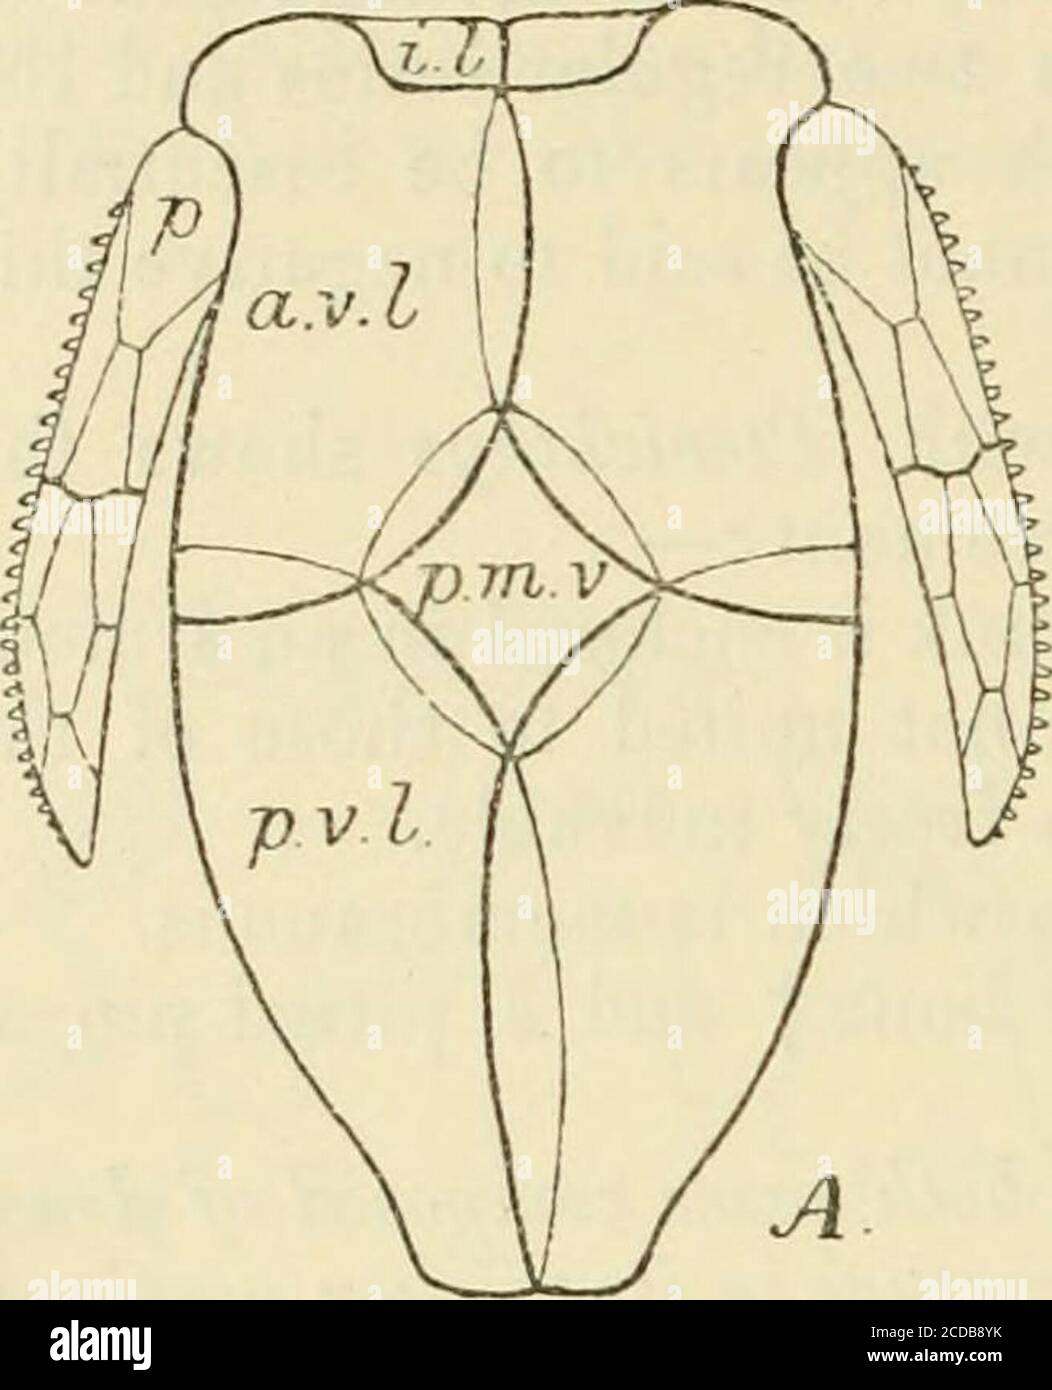 . The annals and magazine of natural history : zoology, botany, and geology . they are onlyseparated by the pineal plate. The postfrontal is fused withthe suborbital. If Jaskel be correct in regarding Homosteus as intermediate * It is noteworthy that Coccosteus resembles Polypterus iu the positionof the nostrils also. t In both cases this bone has been interpreted by some authorities asother than opercular, so that it would be perhaps better to say there is inboth a similarly placed bone which may be regarded as an operculum. % See Smith Woodward, Vertebrate Palaeontology p 12 (1898) andCat. F Stock Photo